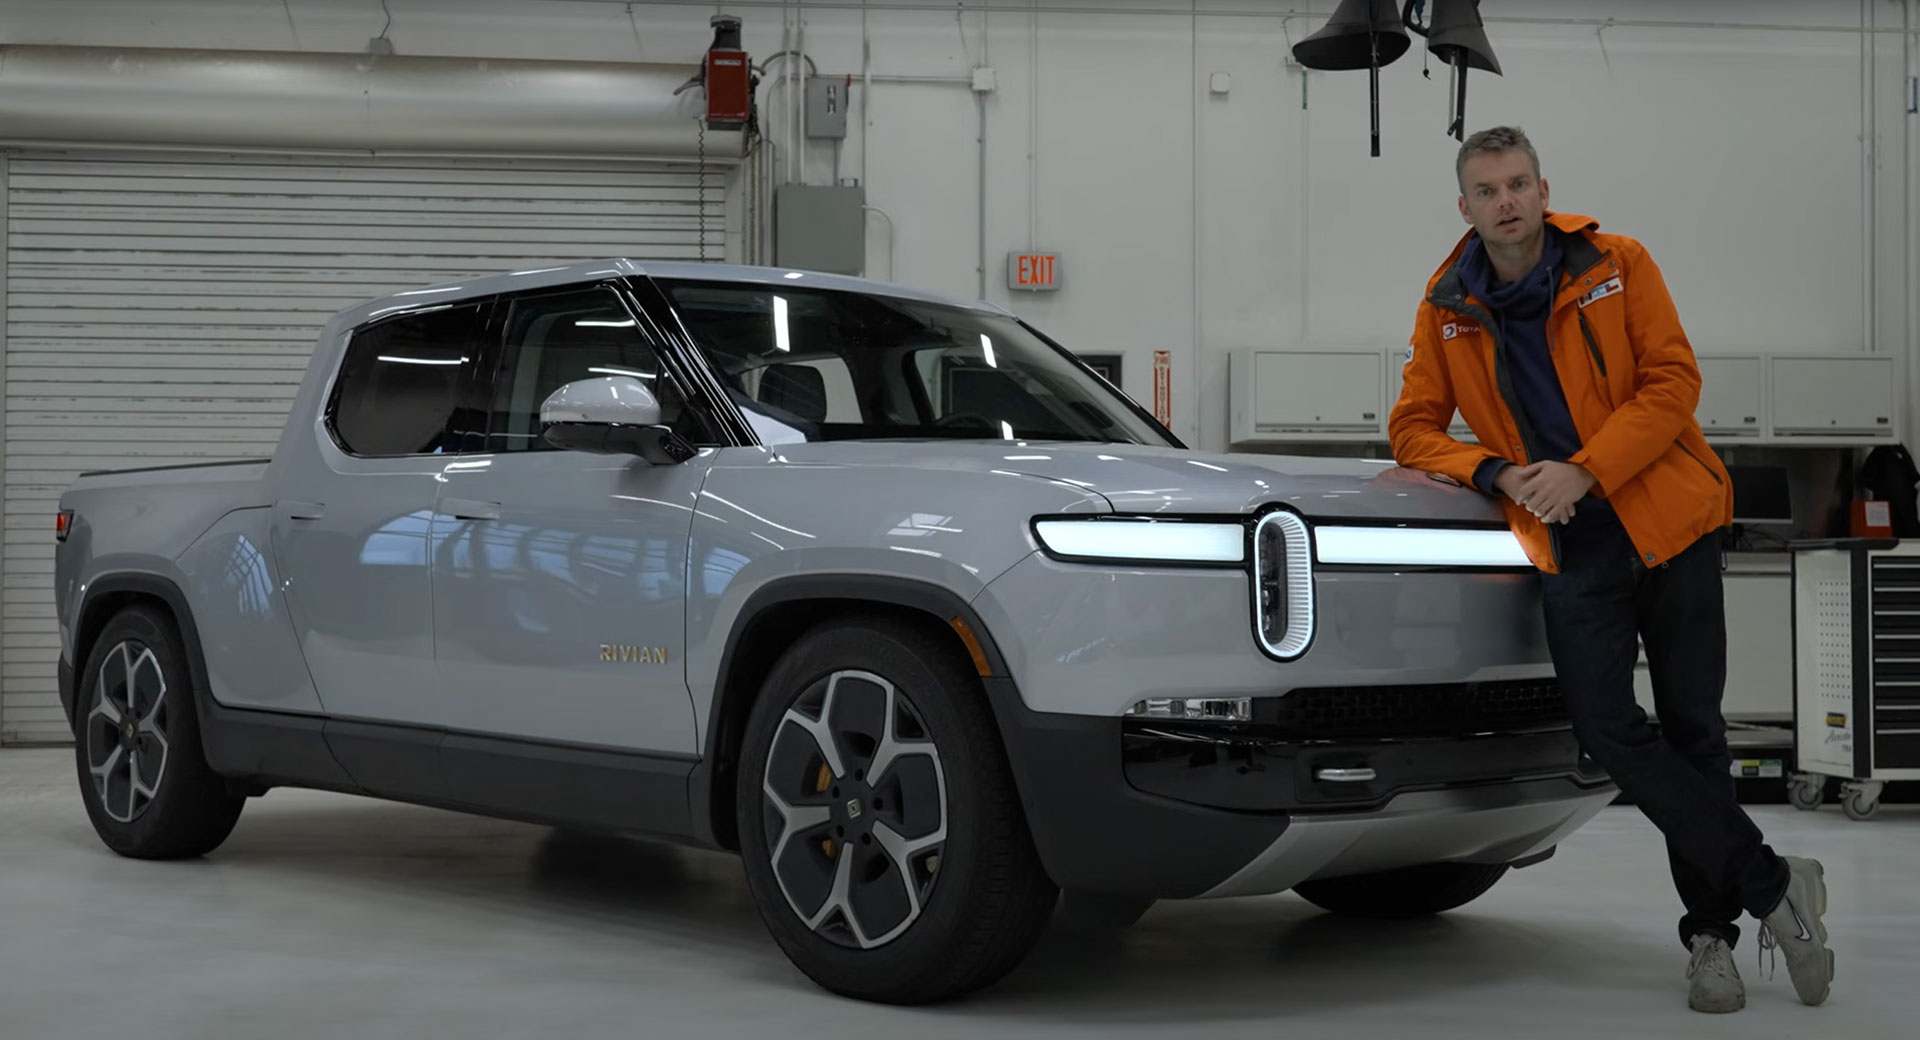 Rivian R1T Hits 60 MPH In 3.5 Seconds And Sets 11.9 Second QuarterMile